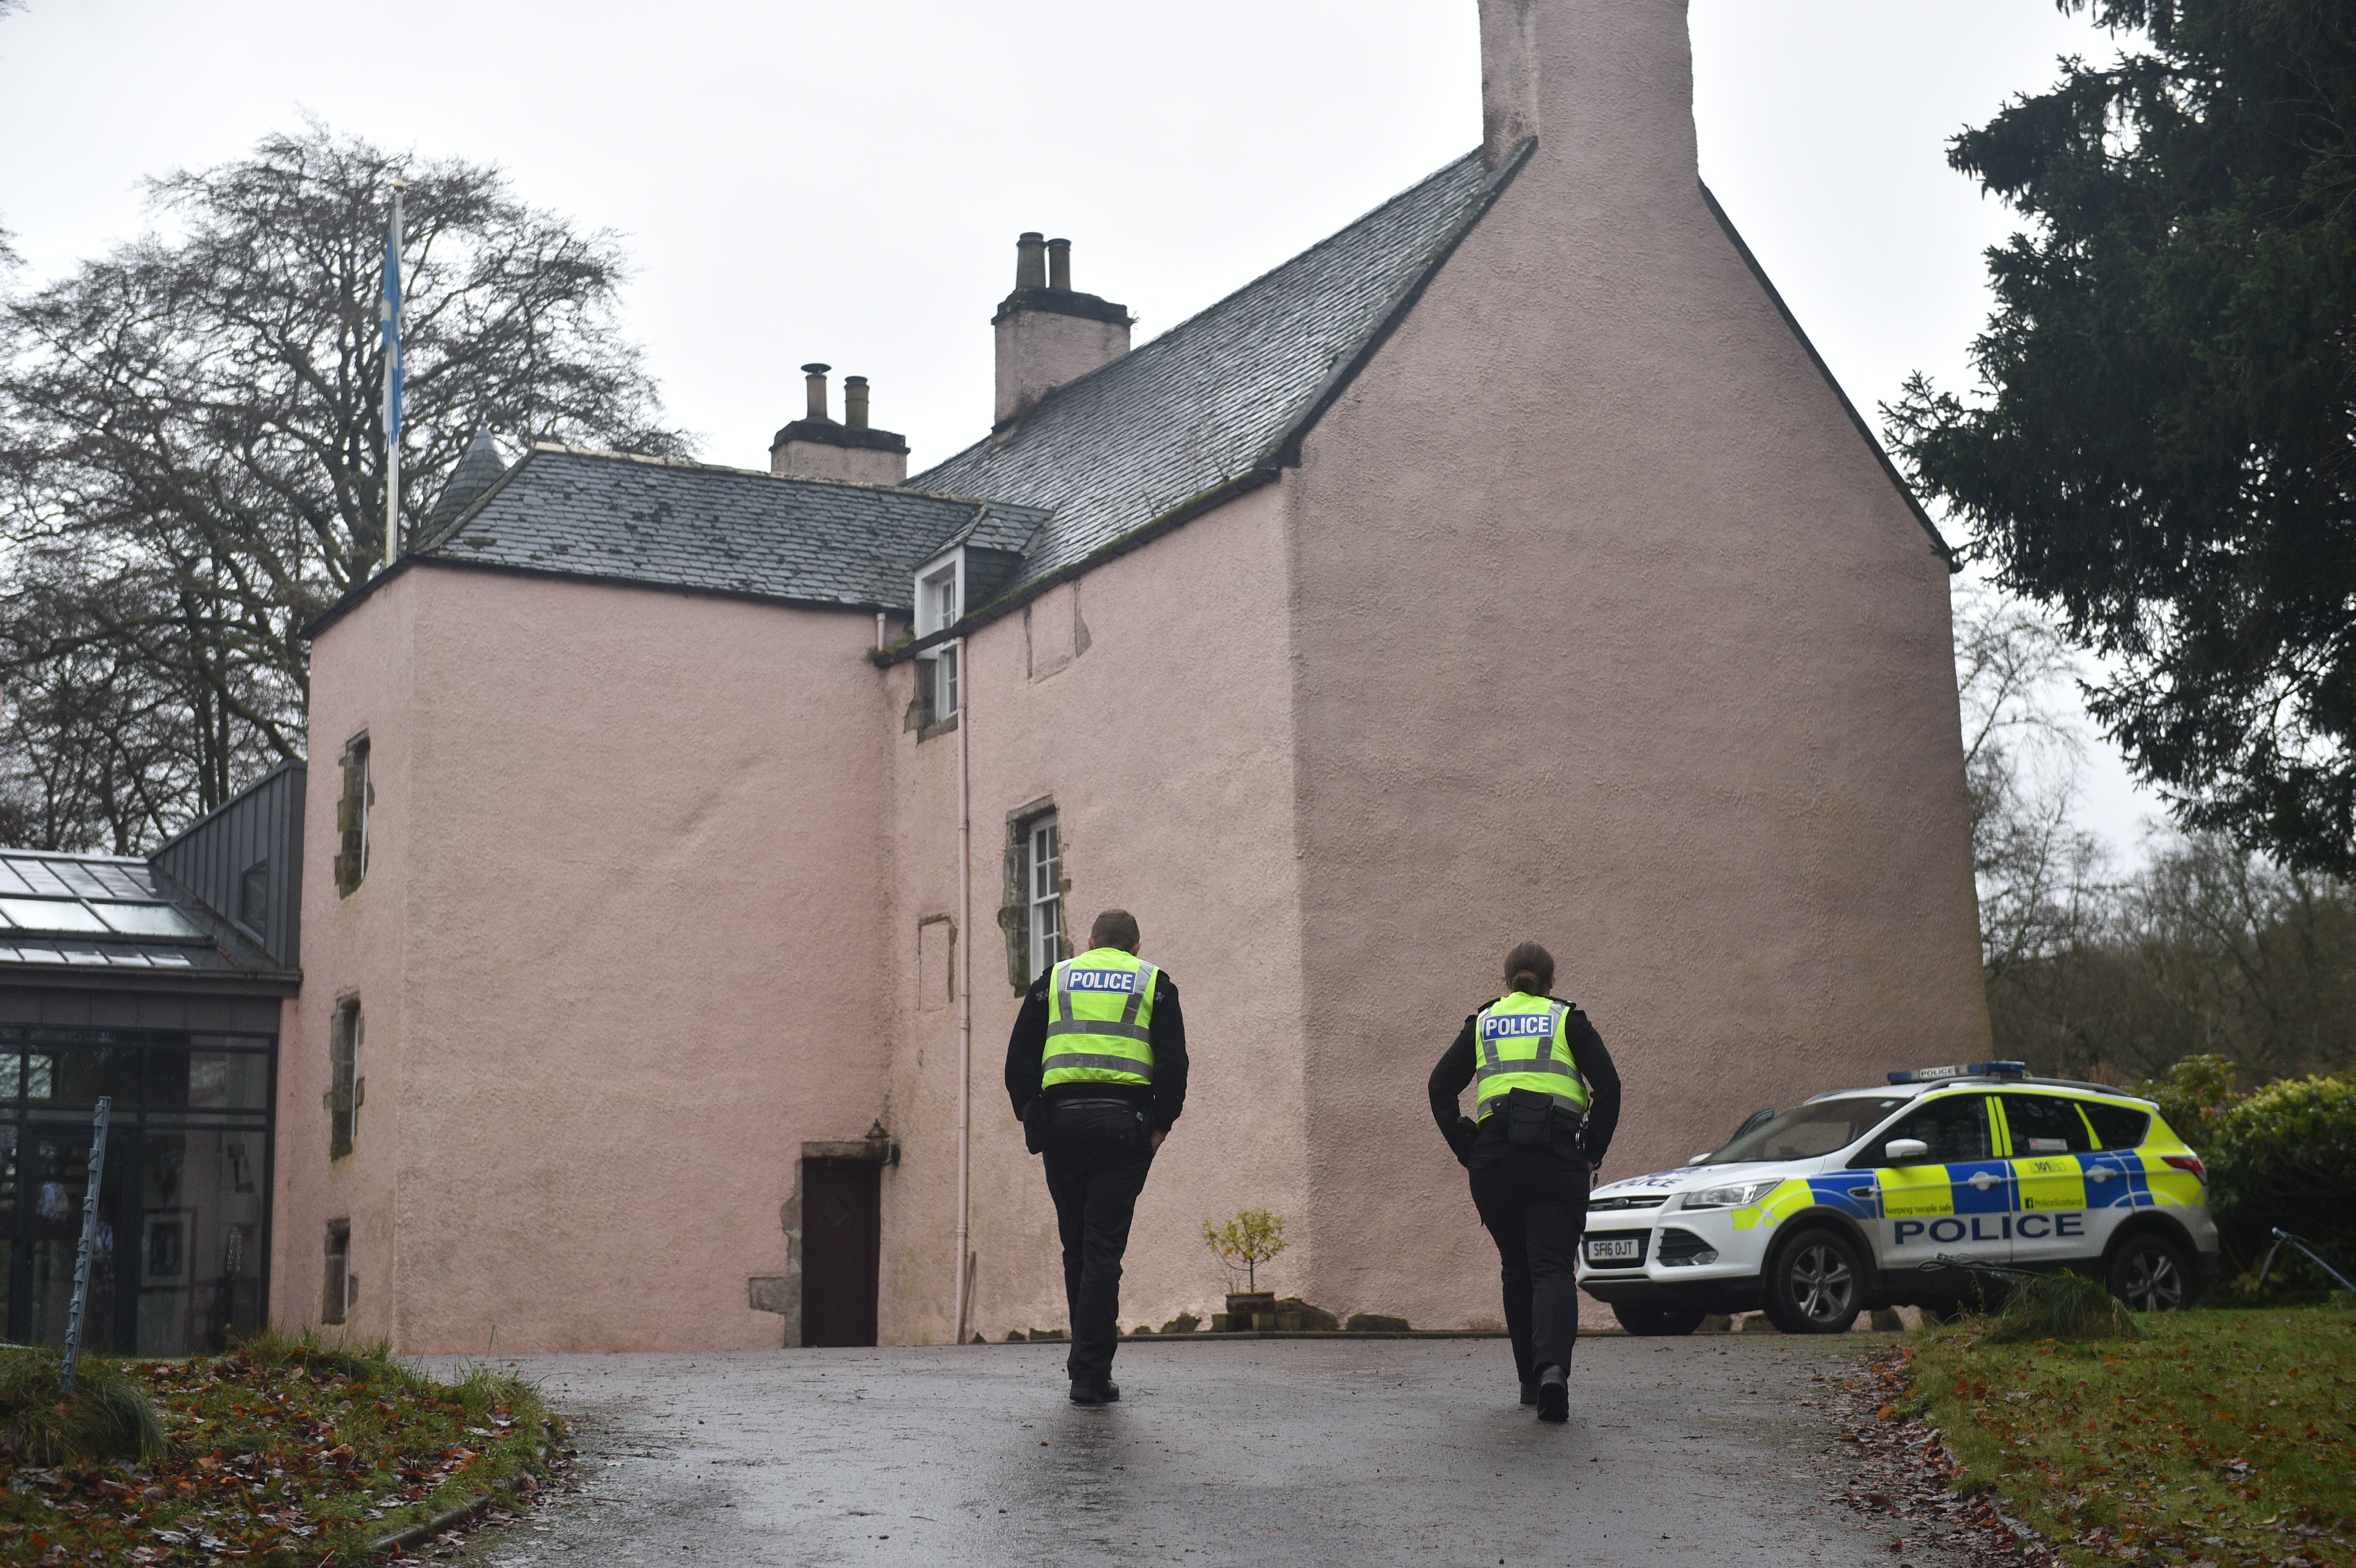 Police at the scene, where two bodies were found at a Mergie holiday cottages.